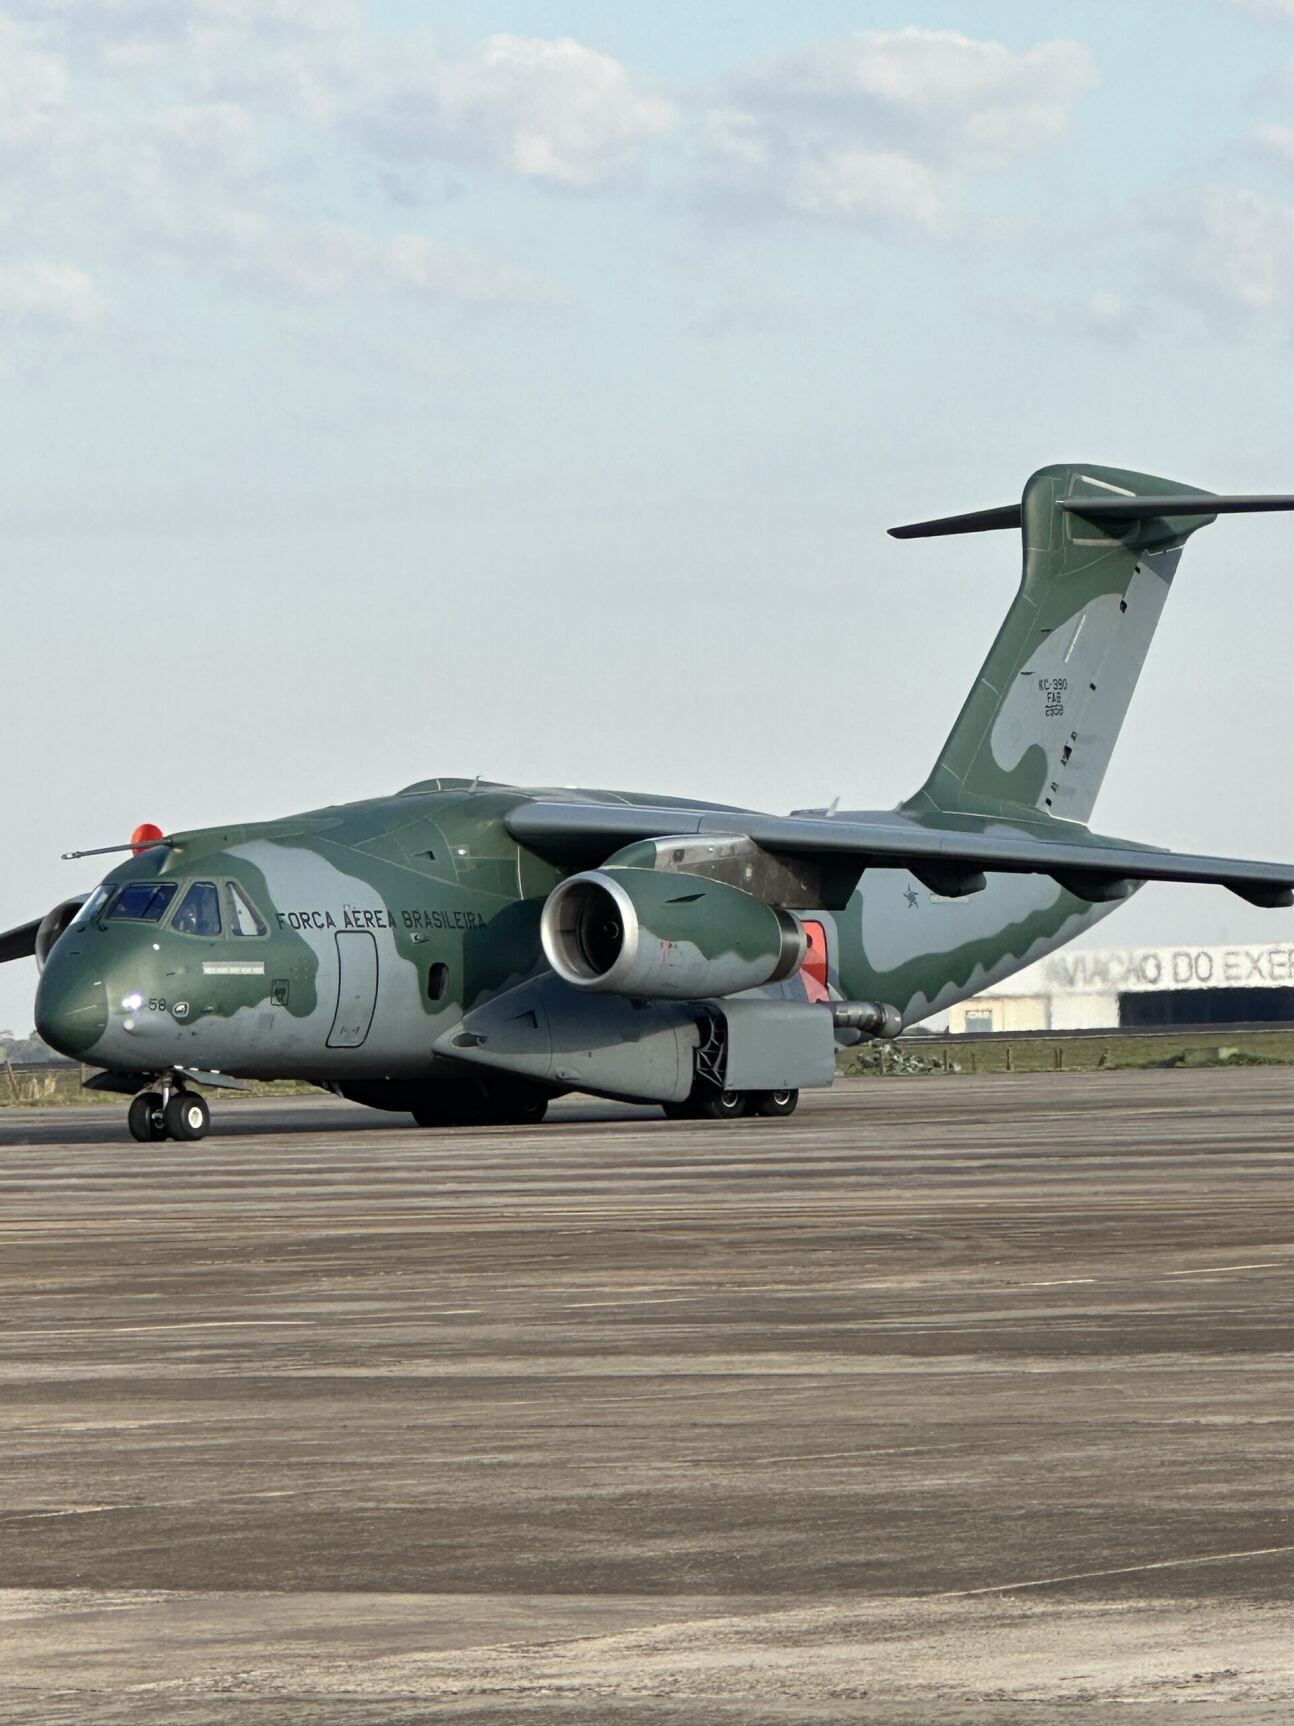 Colombia Receives Help From Brazil for Aerial Firefighting with MAFFS II